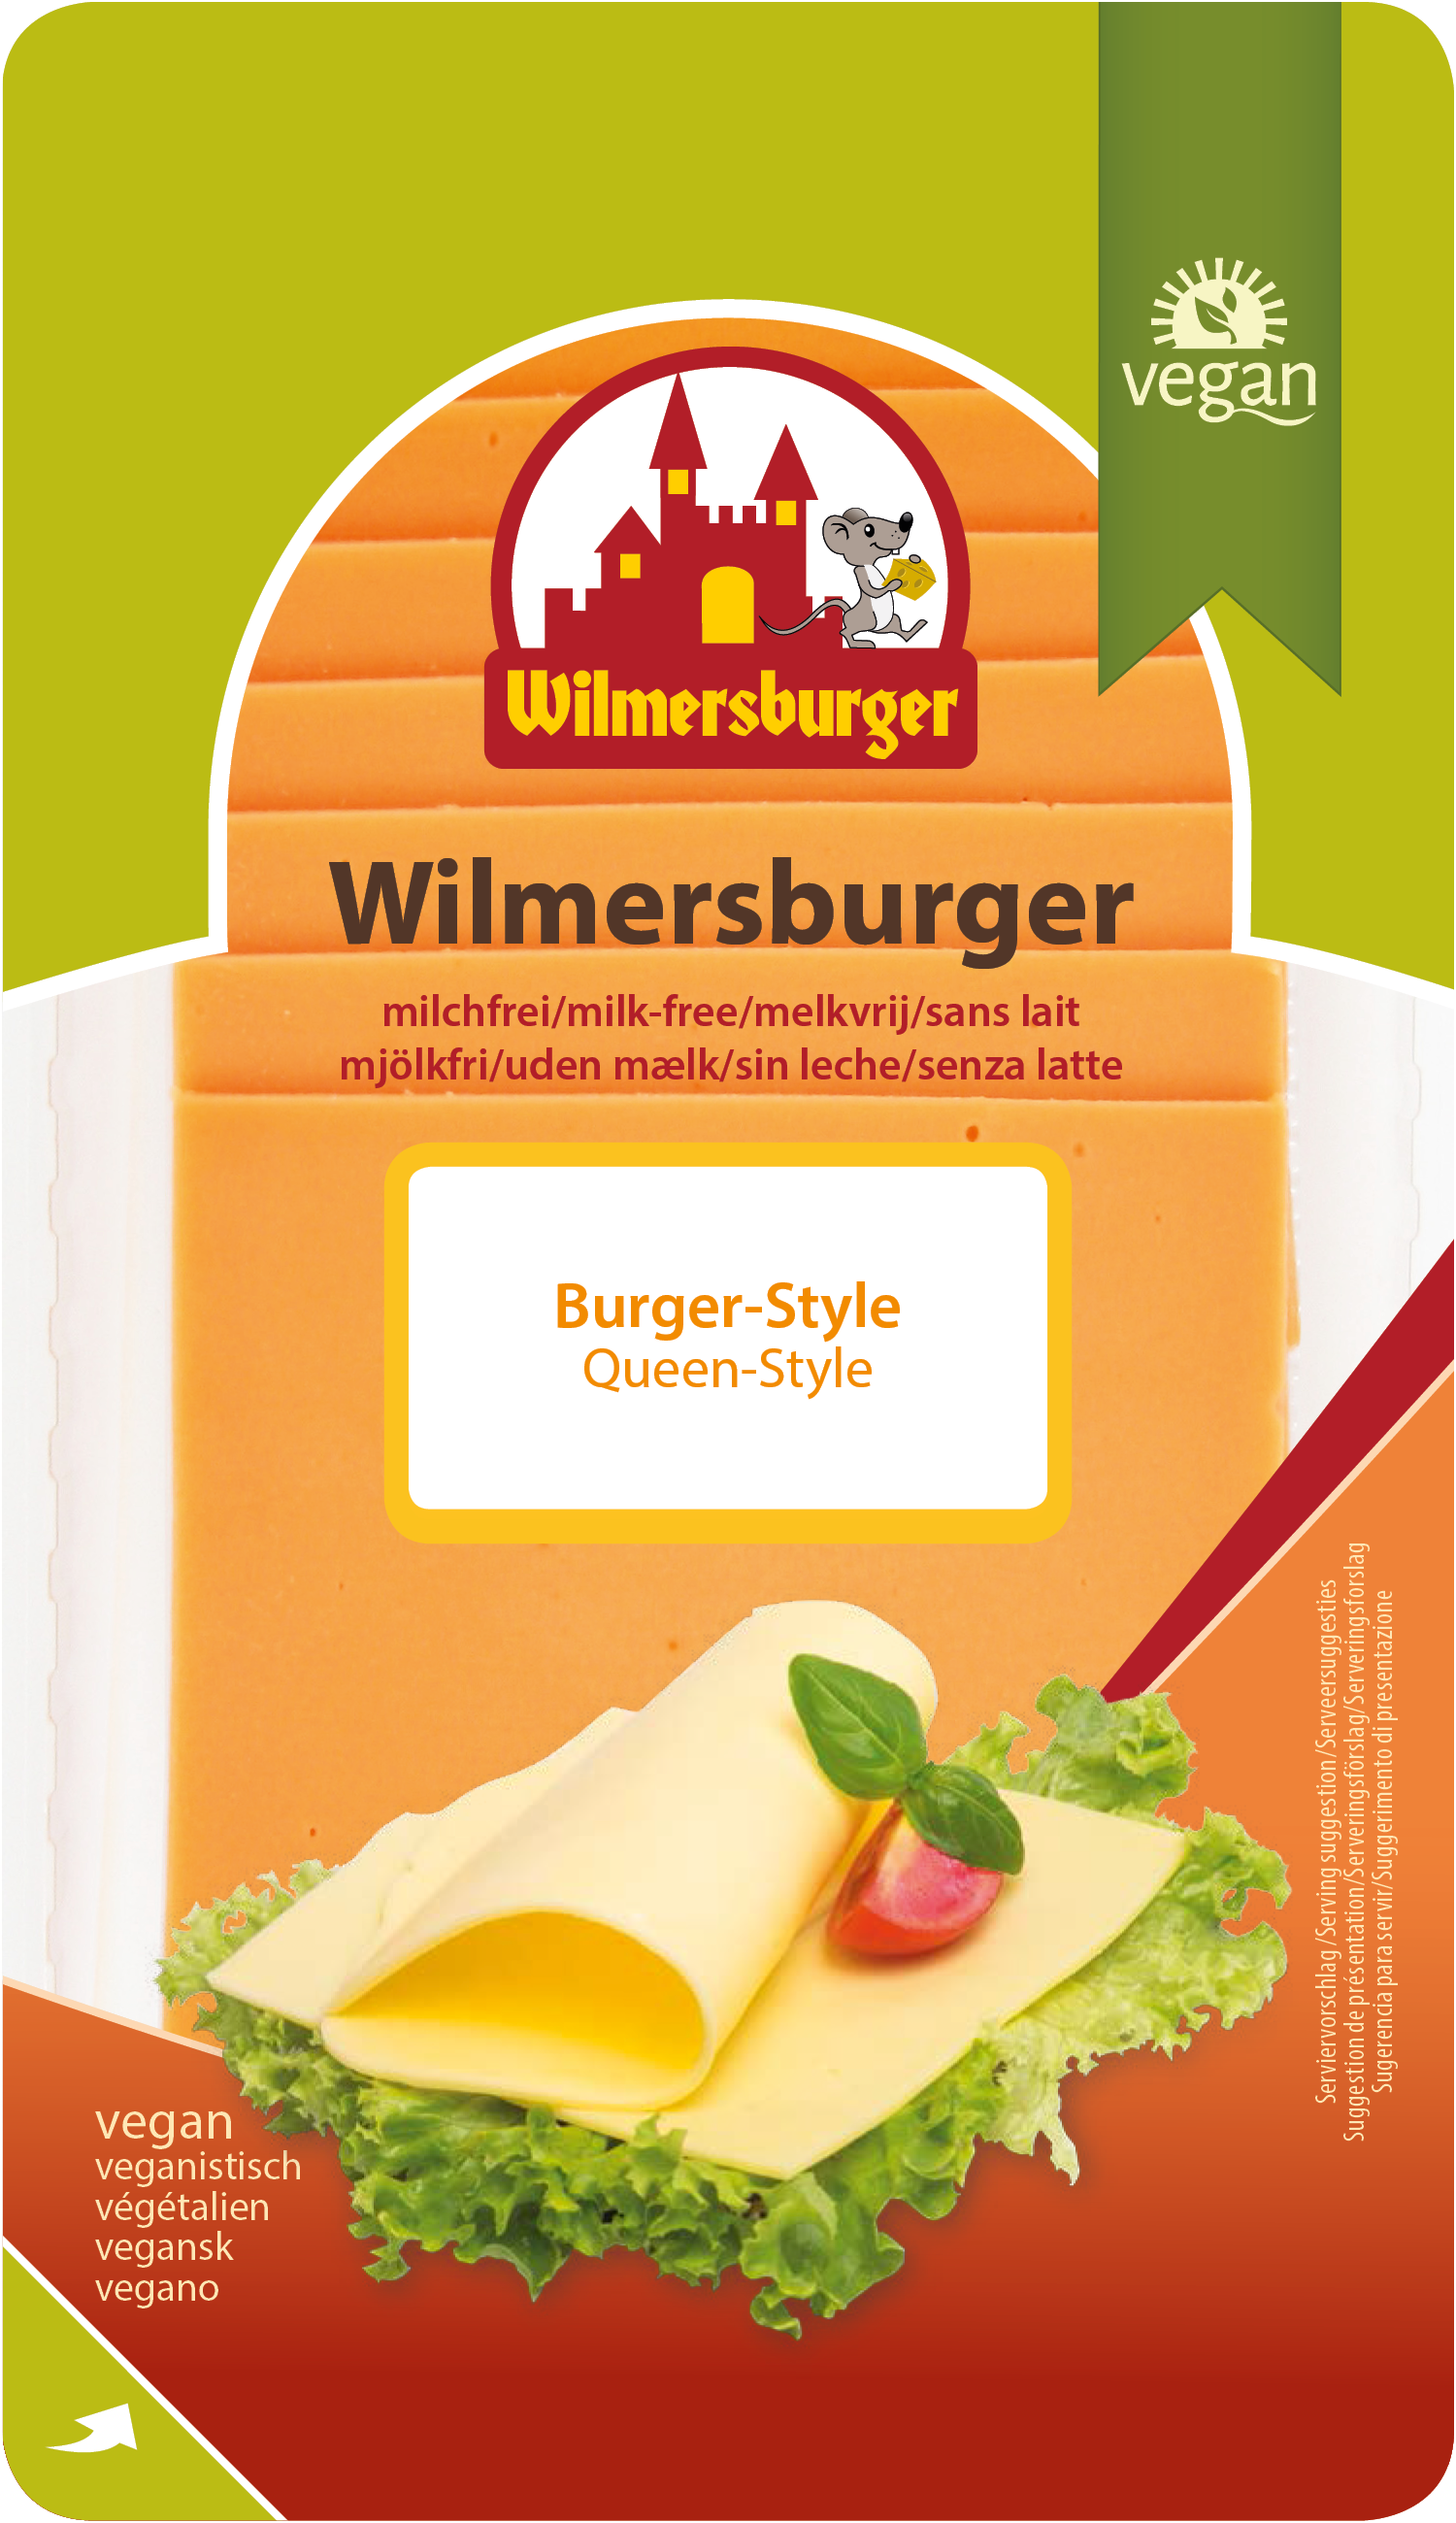 Slices Burger-Style (Queen-Style)